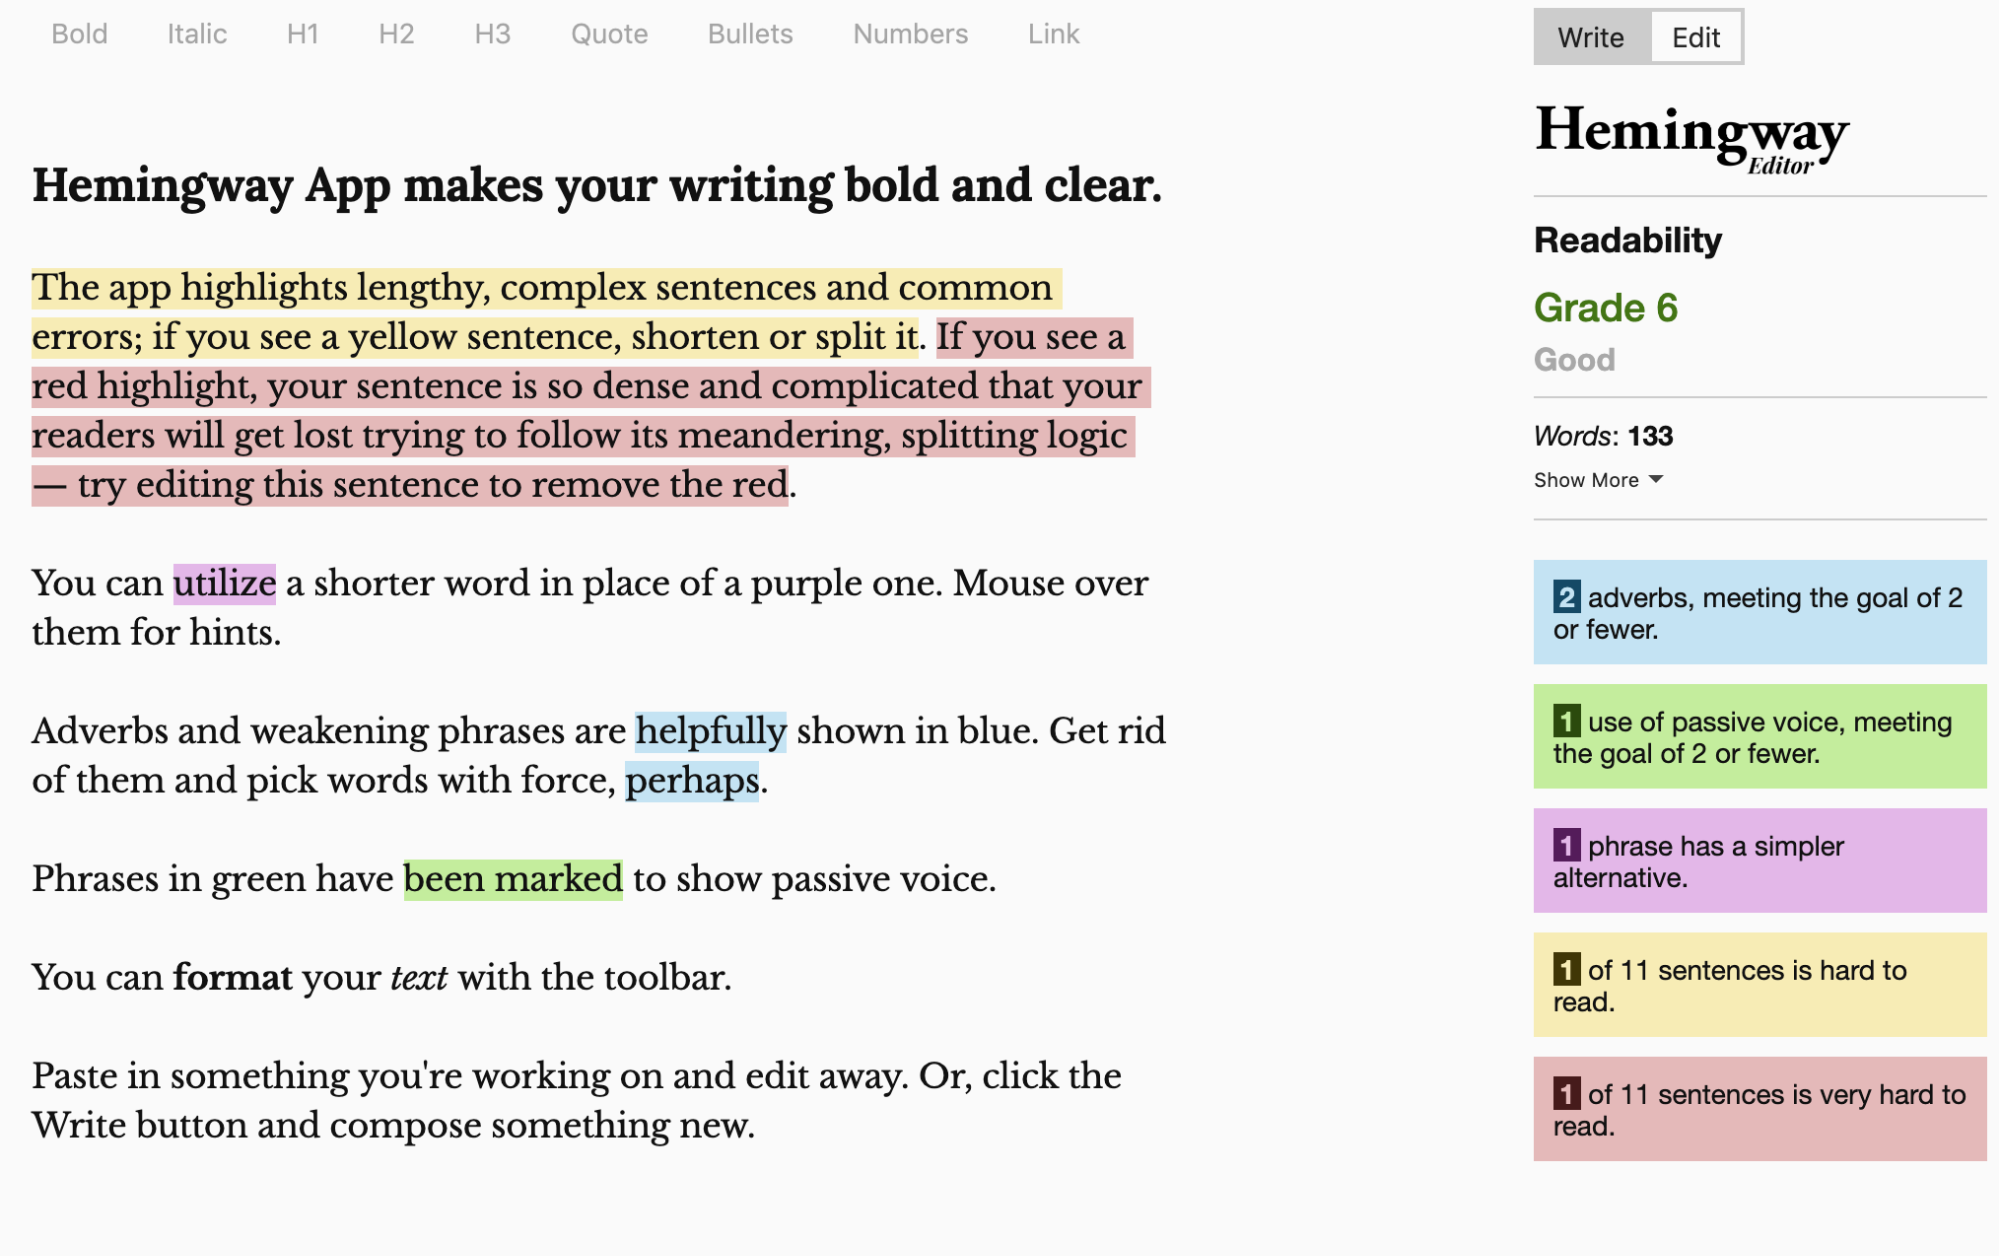 The homepage of Hemingway explaining how it grades your content based on readability, simplicity, passive voice and adverbs used. 